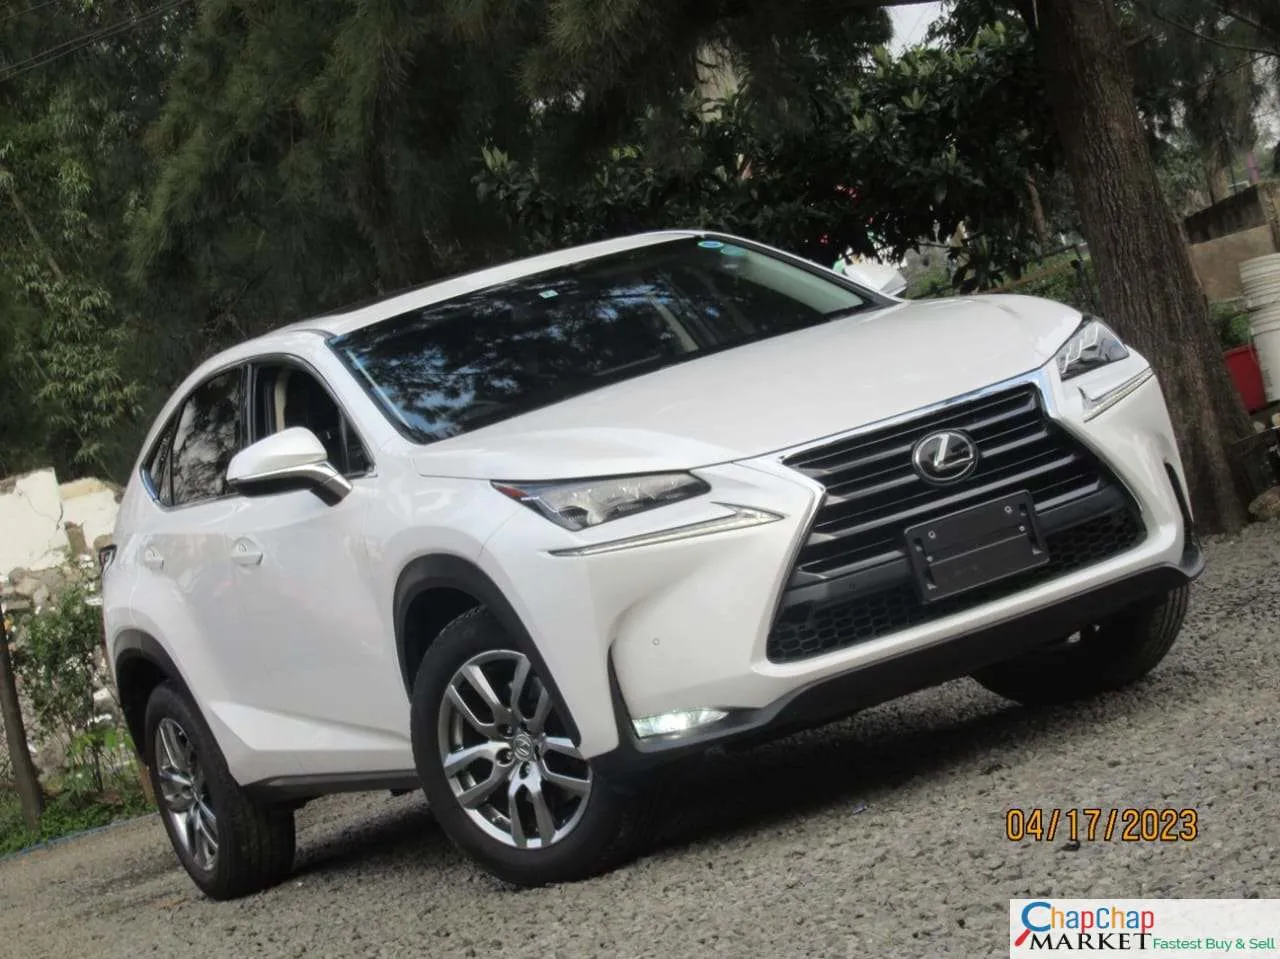 Cars Cars For Sale/Vehicles-LEXUS Nx200t Nx 200 t for Sale in Kenya You Pay 20% Deposit Trade in OK EXCLUSIVE 9